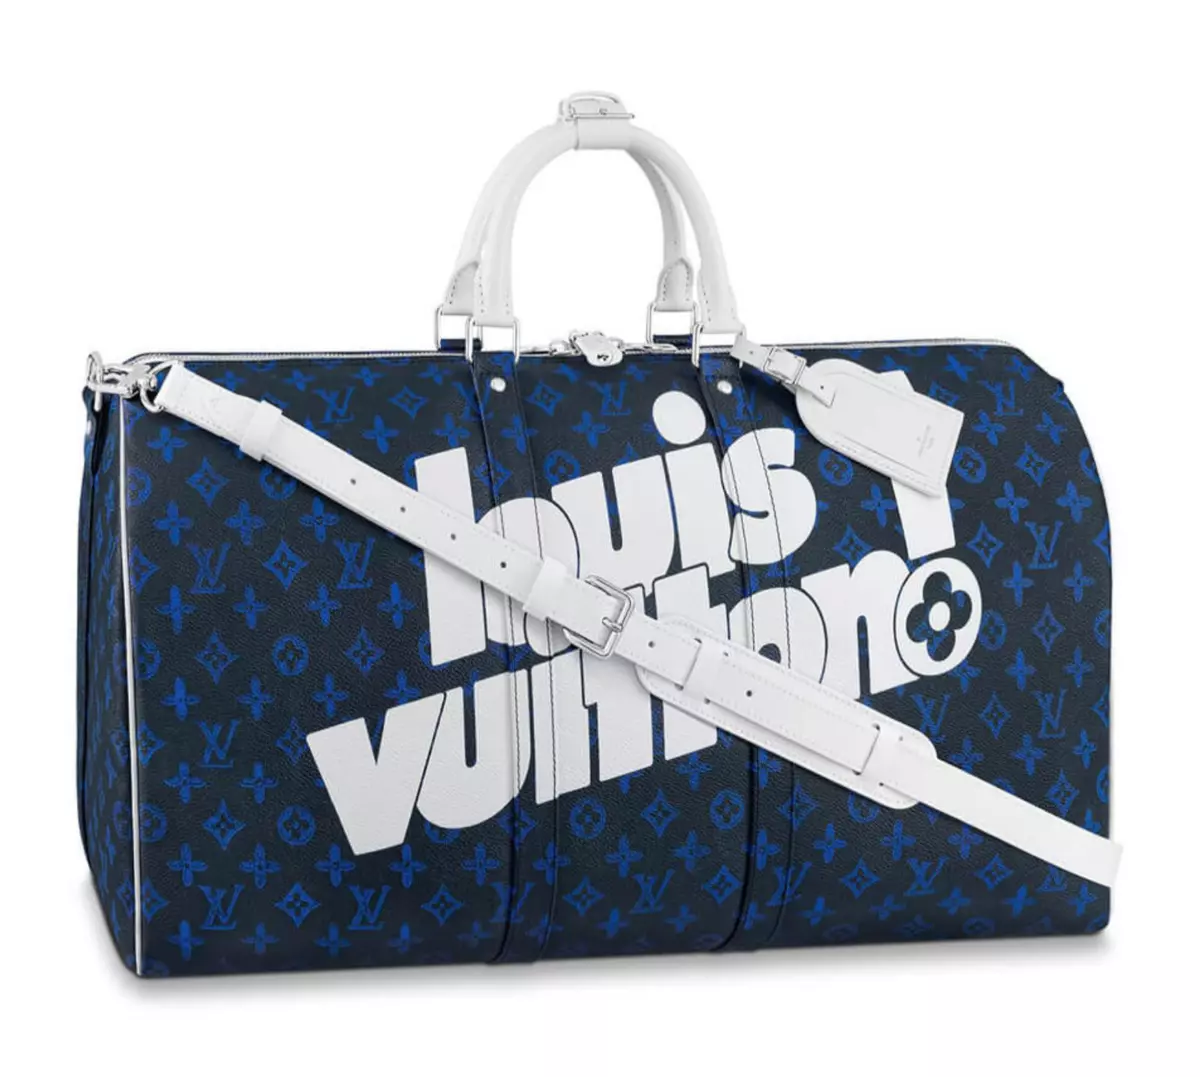 New in Box Louis Vuitton Limited Edition Clouds Keepall Abloh Bag